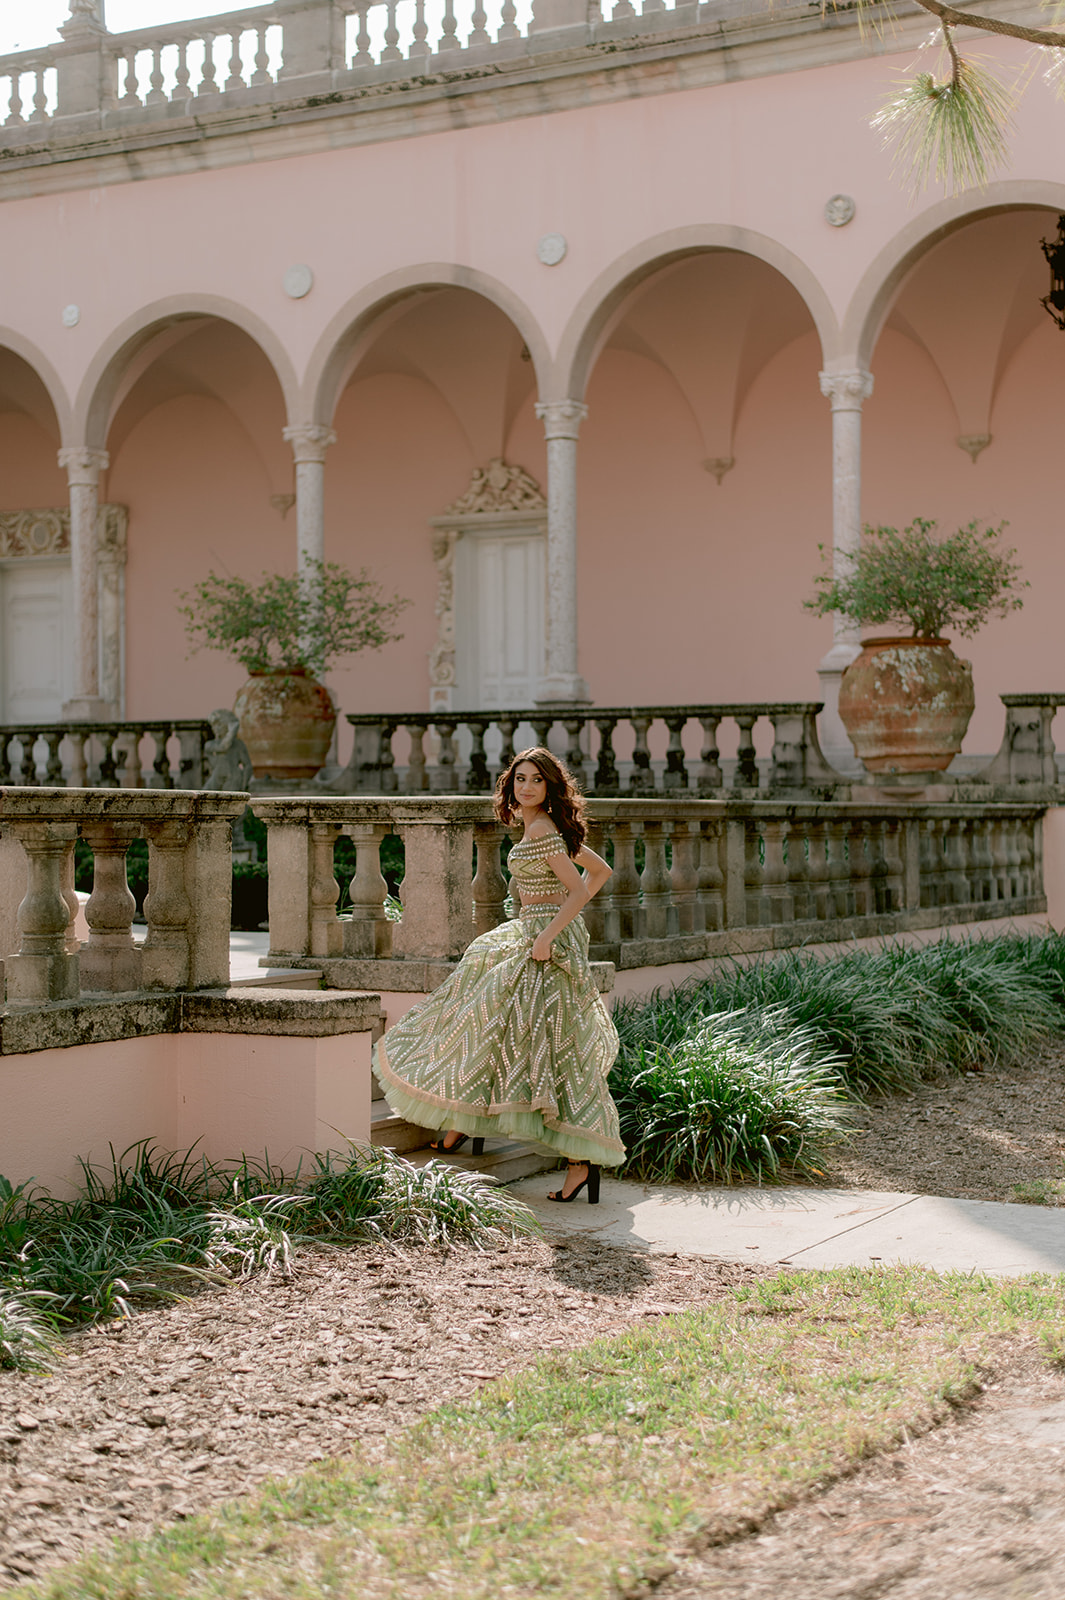 "Ringling Museum engagement session with stunning Indian attire and romantic details"
